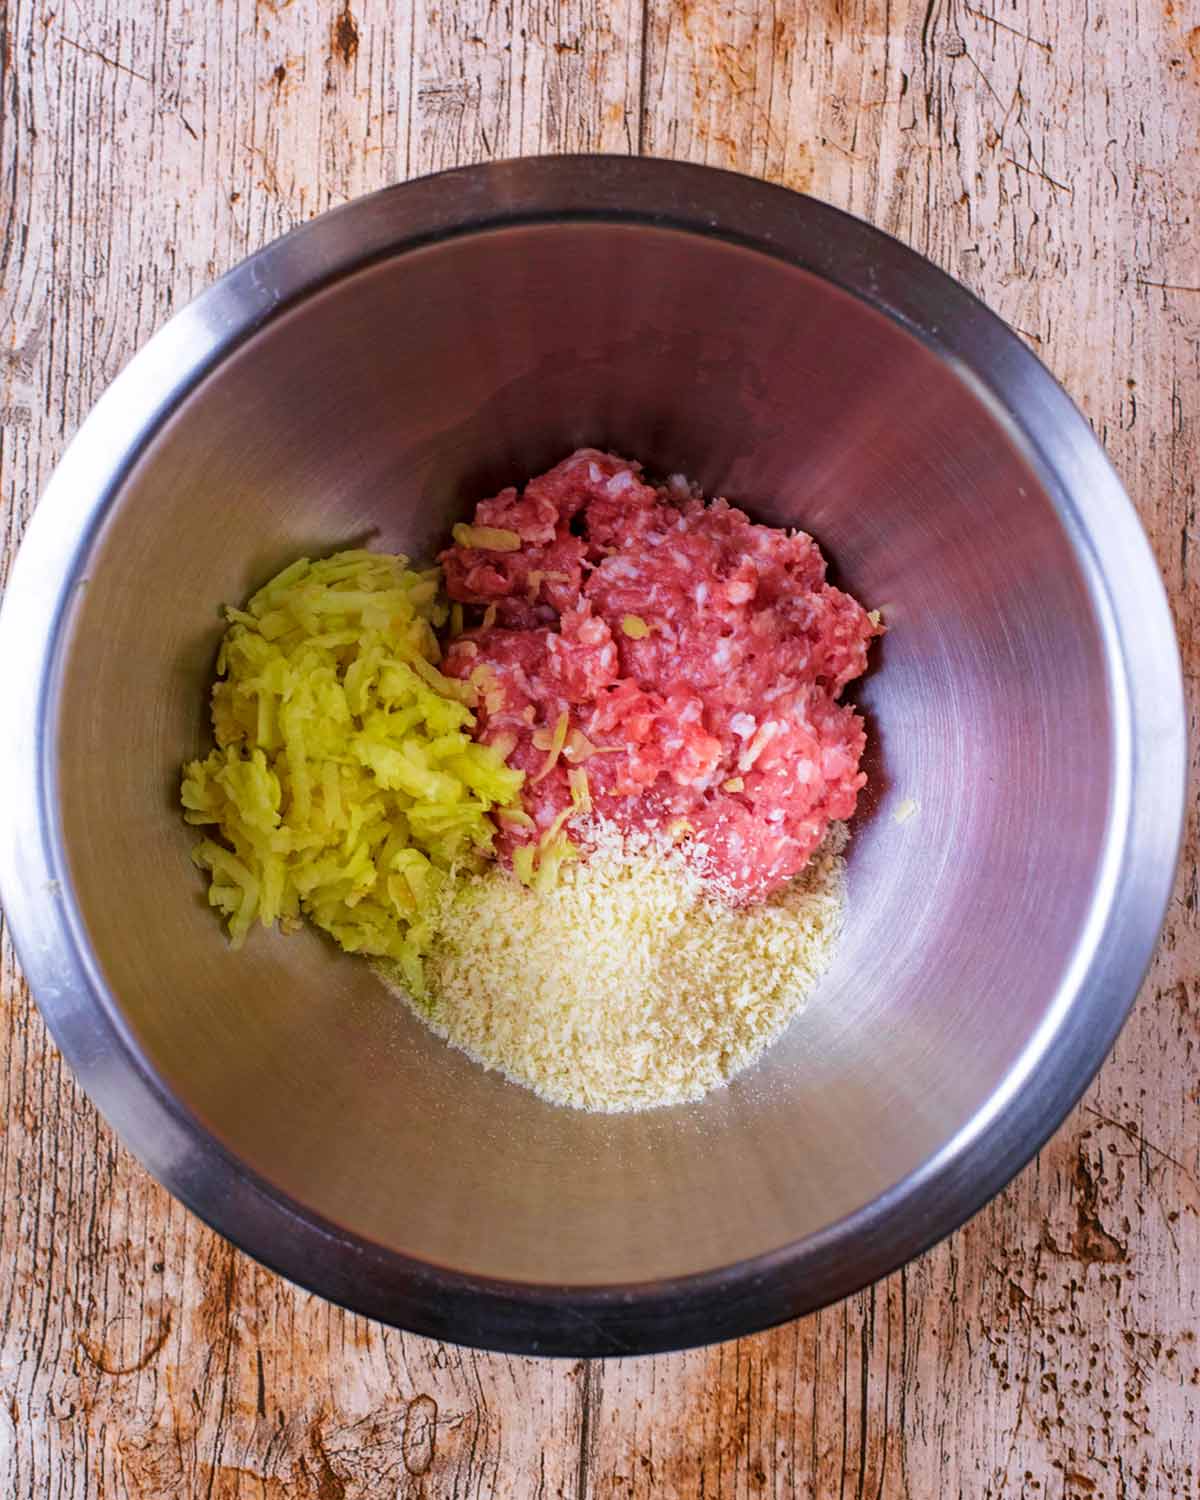 A bowl containing pork mince, grated apple and breadcrumbs.